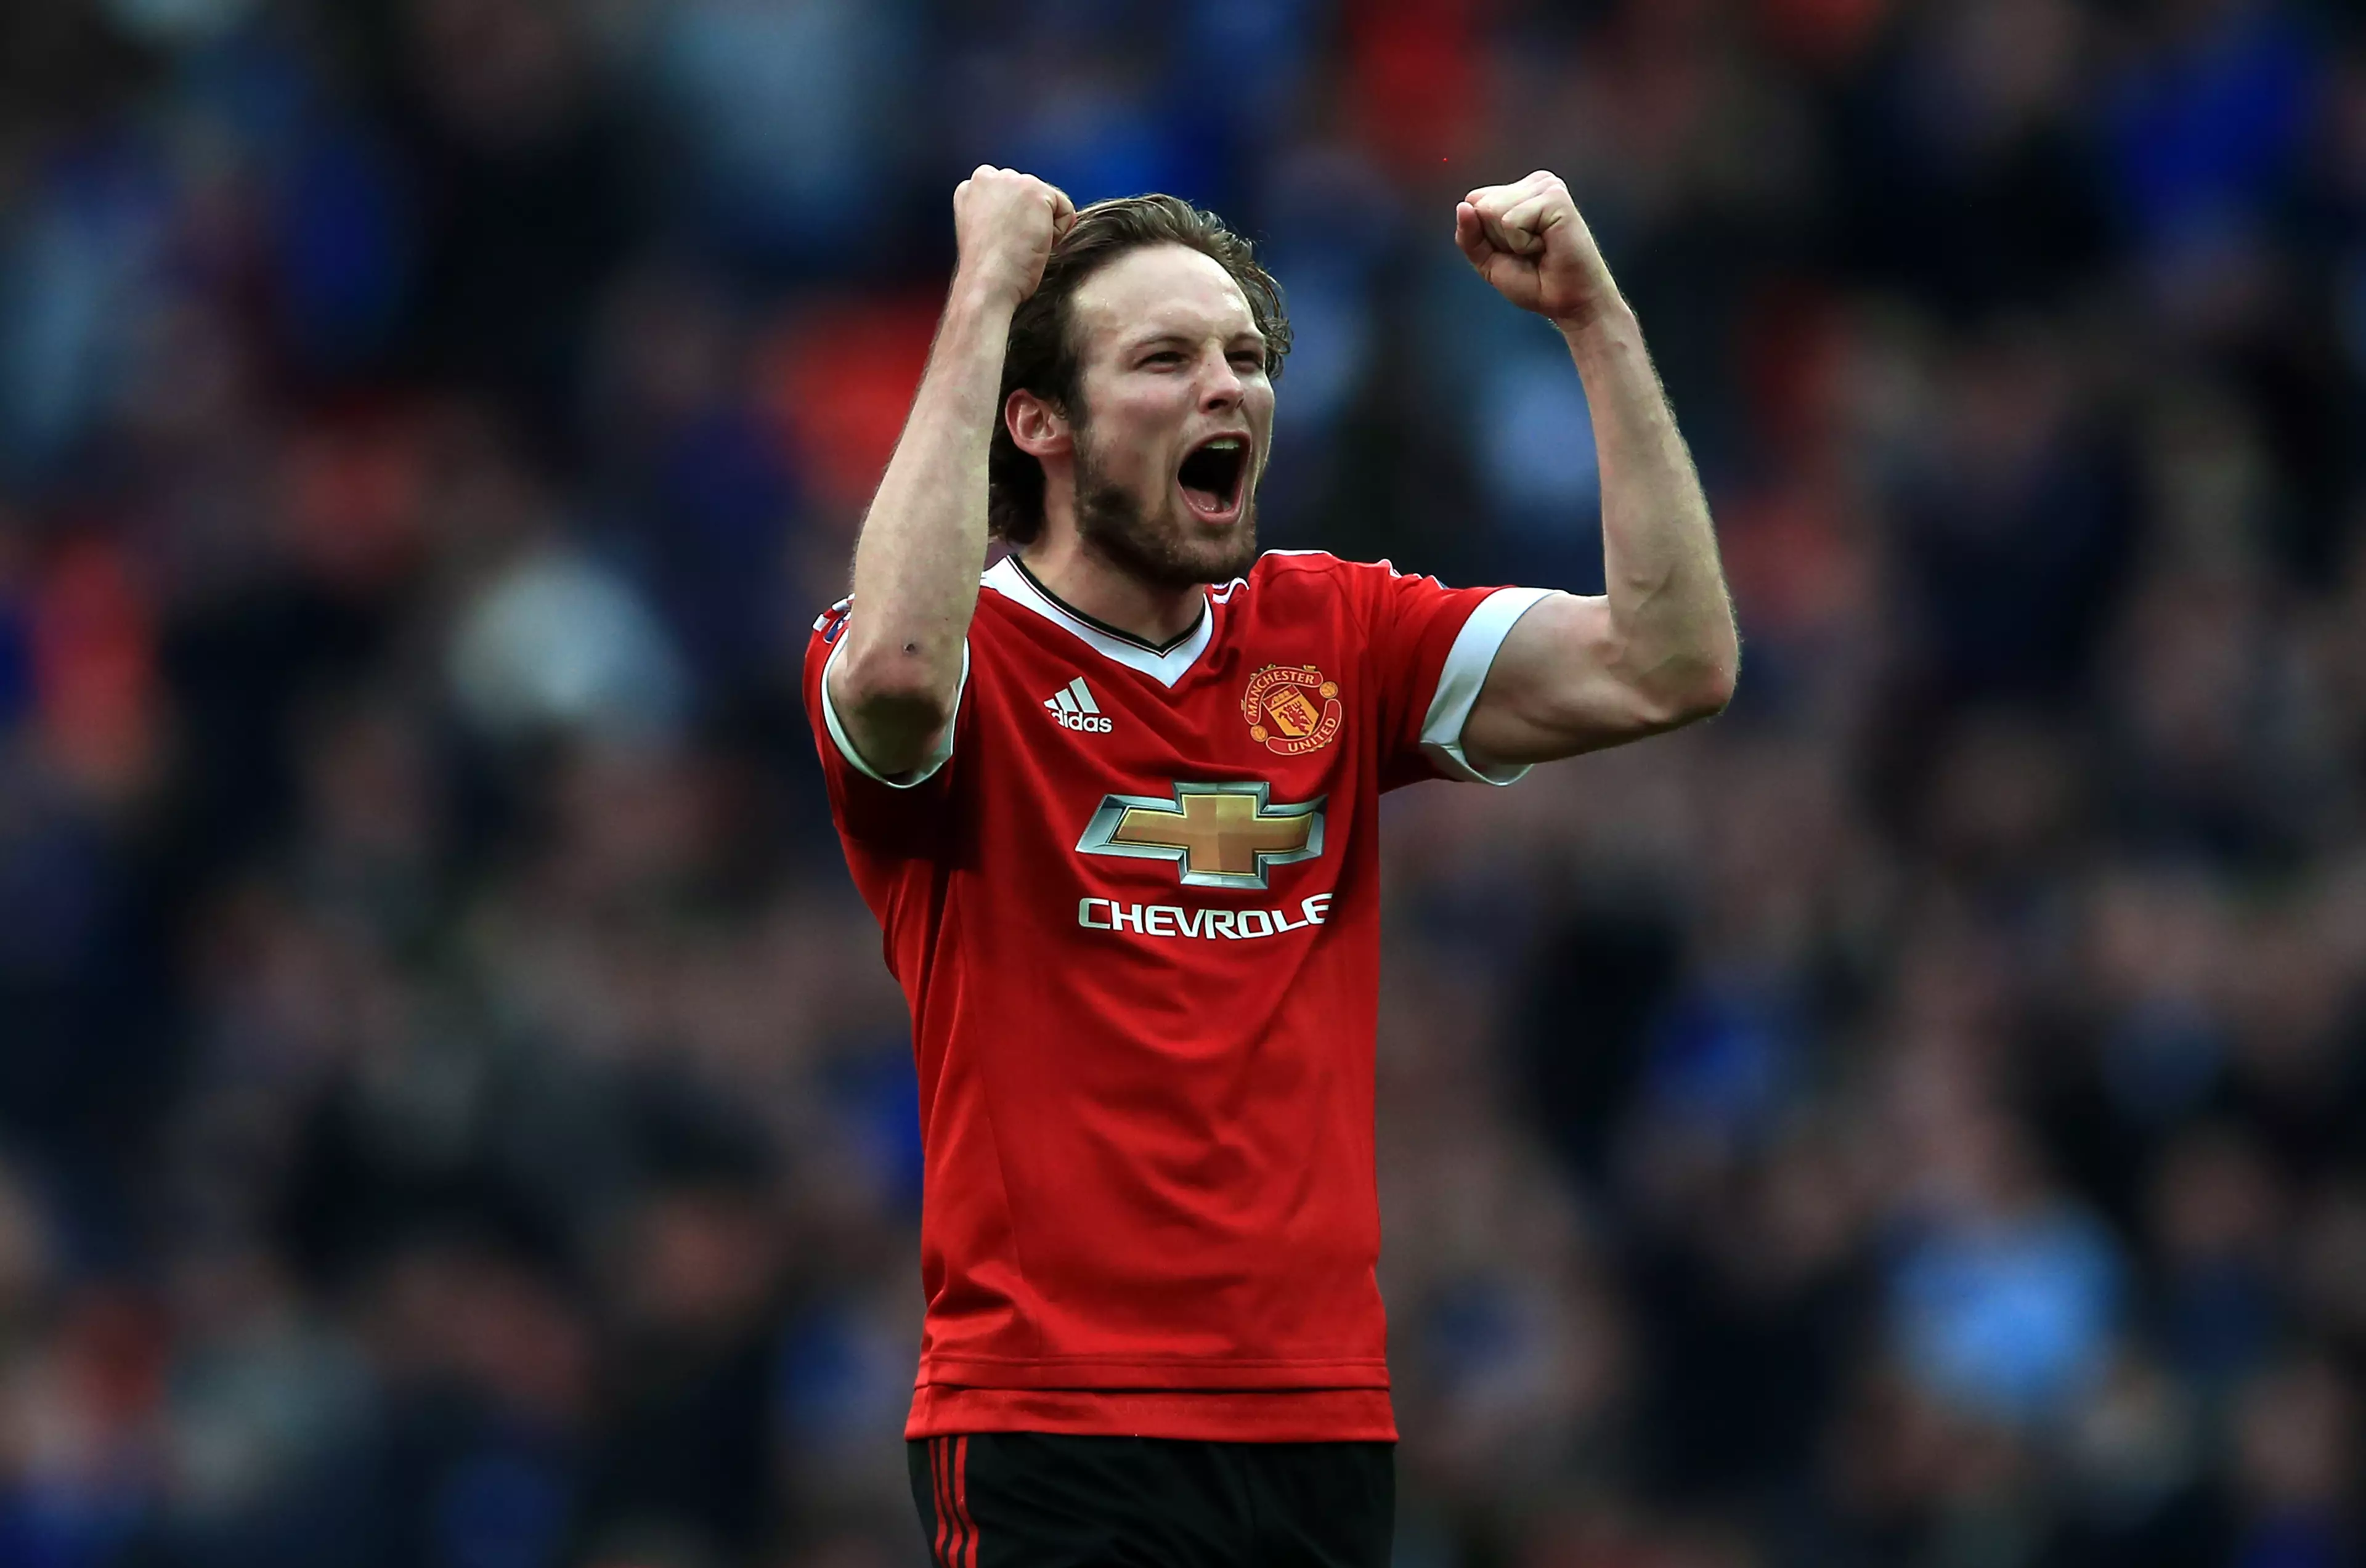 Daley Blind might be United's most handsome players but it won't help him stay at Old Trafford. Image: PA Images.